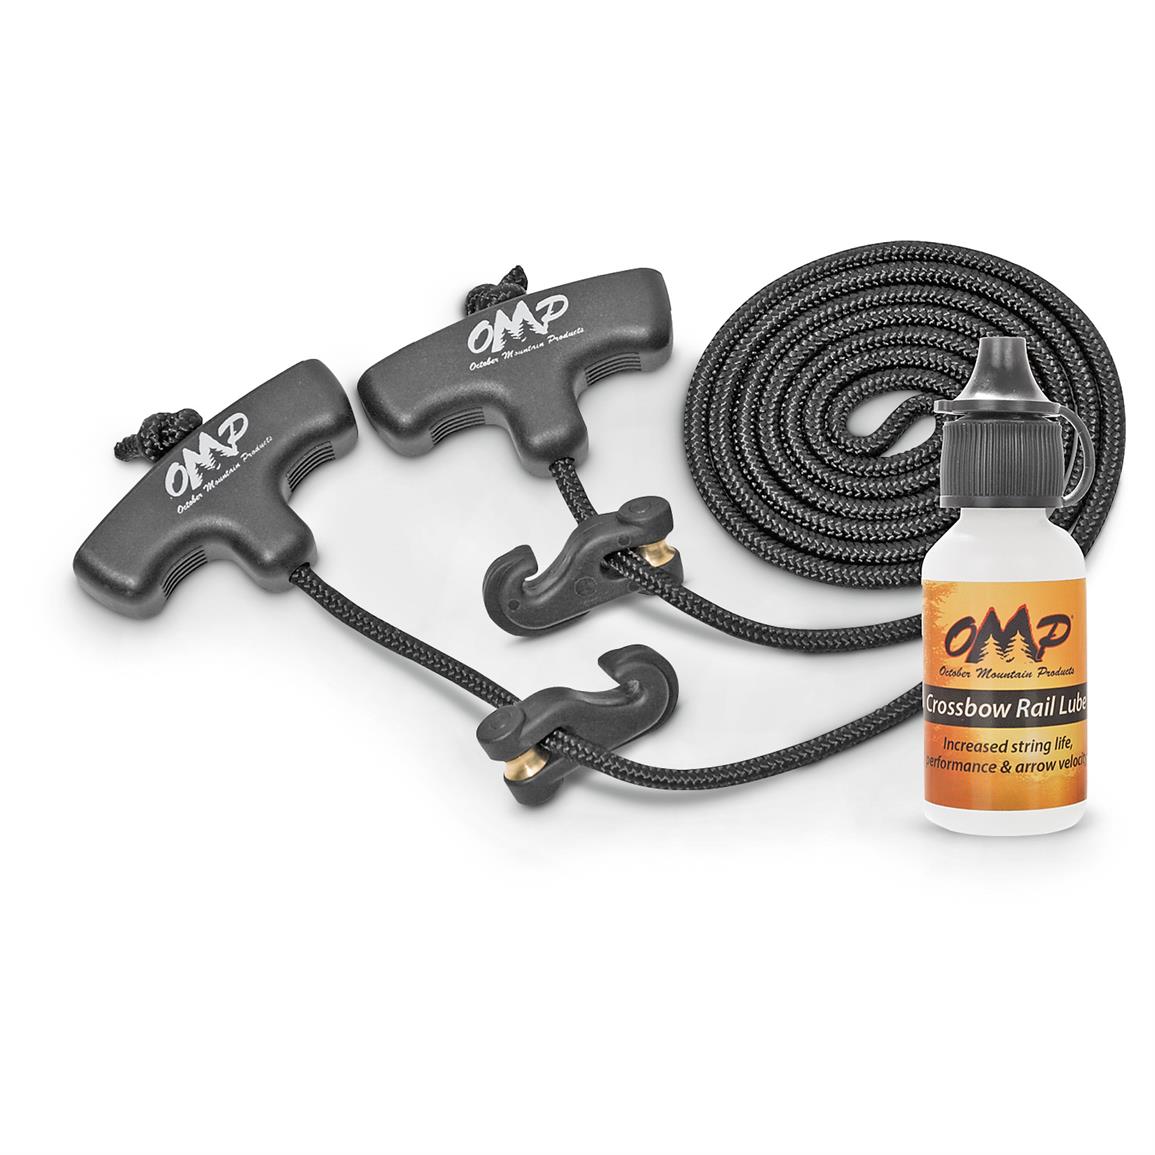 Universal Crossbow Cocking Rope and Rail Lube